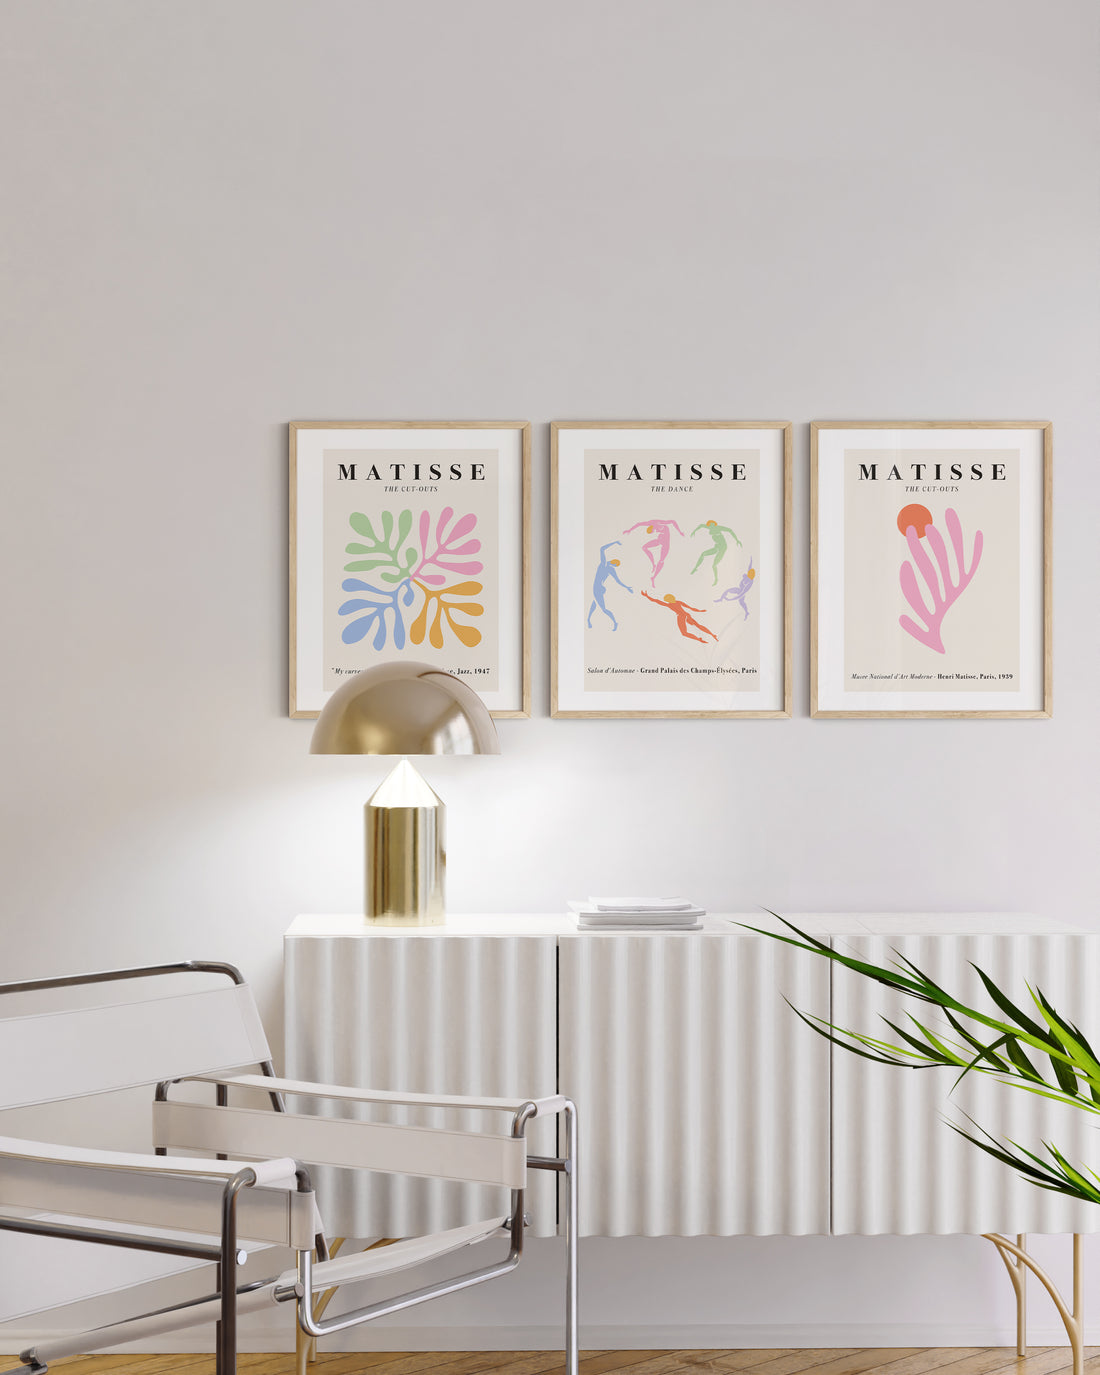 Wall Art to Set the Mood: Peaceful Pastel Prints